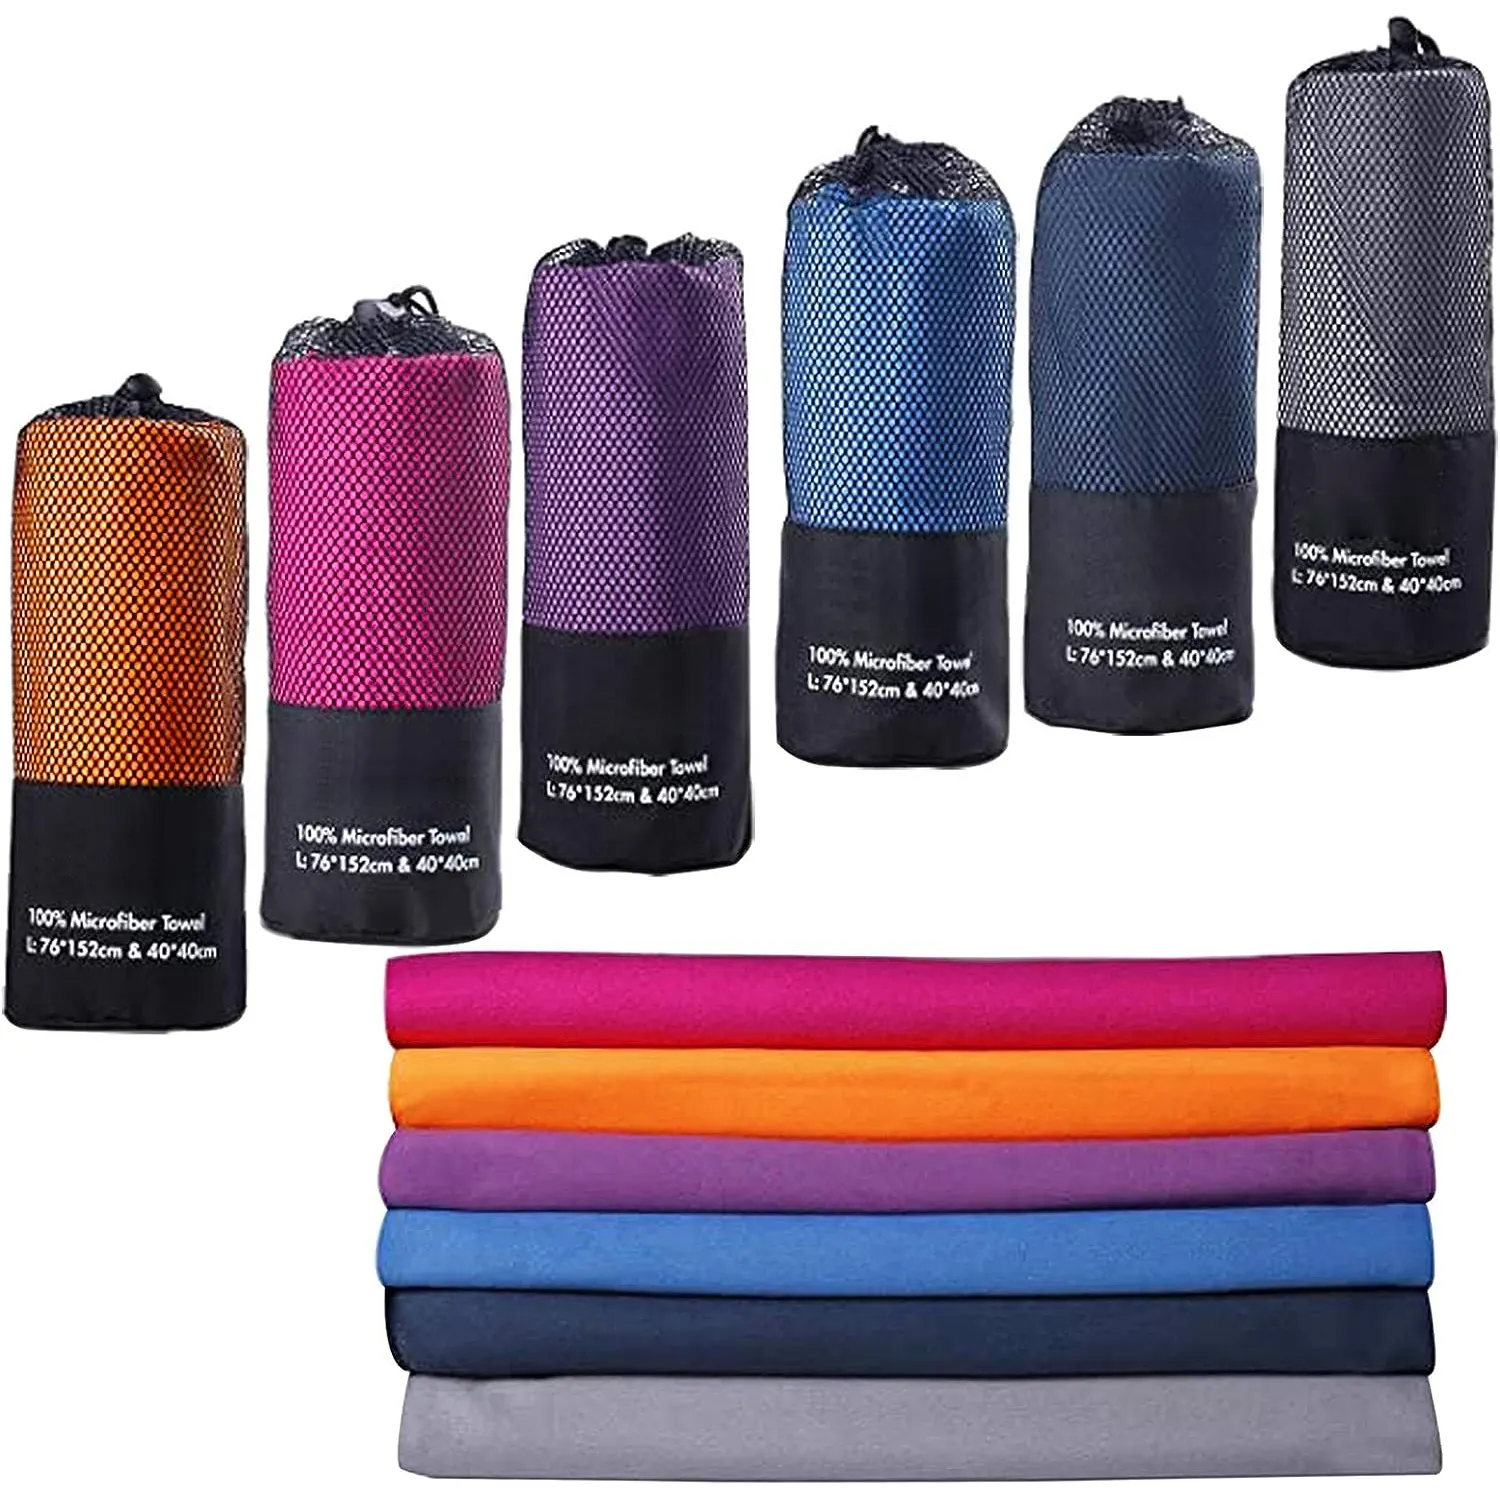 Custom sized fast drying super absorbent portable Yoga fitness camping outdoor microfiber towel